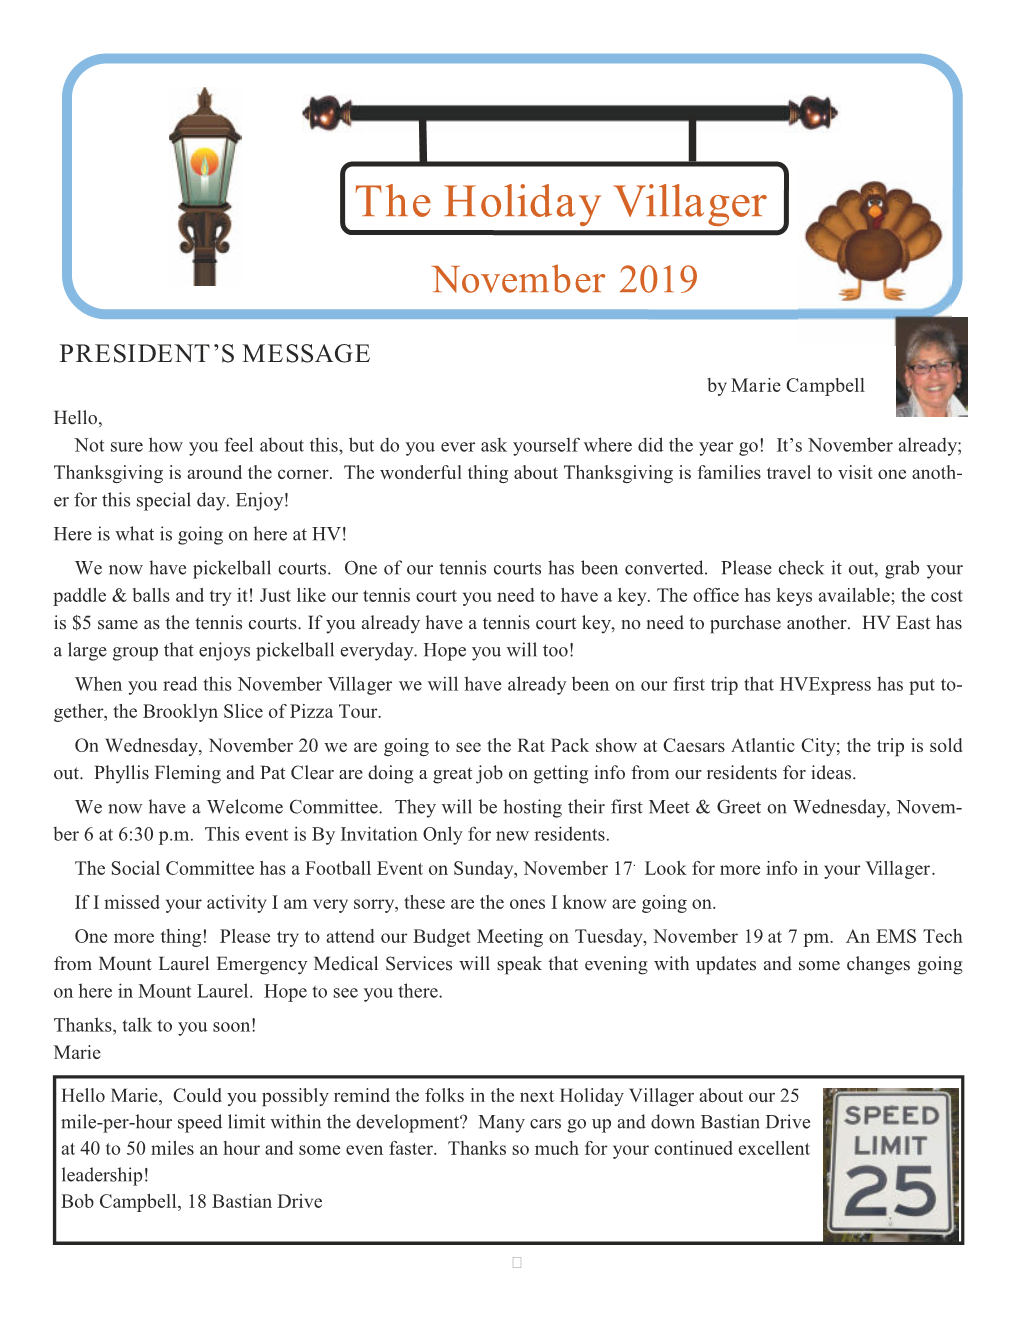 The Holiday Villager November 2019 PRESIDENT's MESSAGE